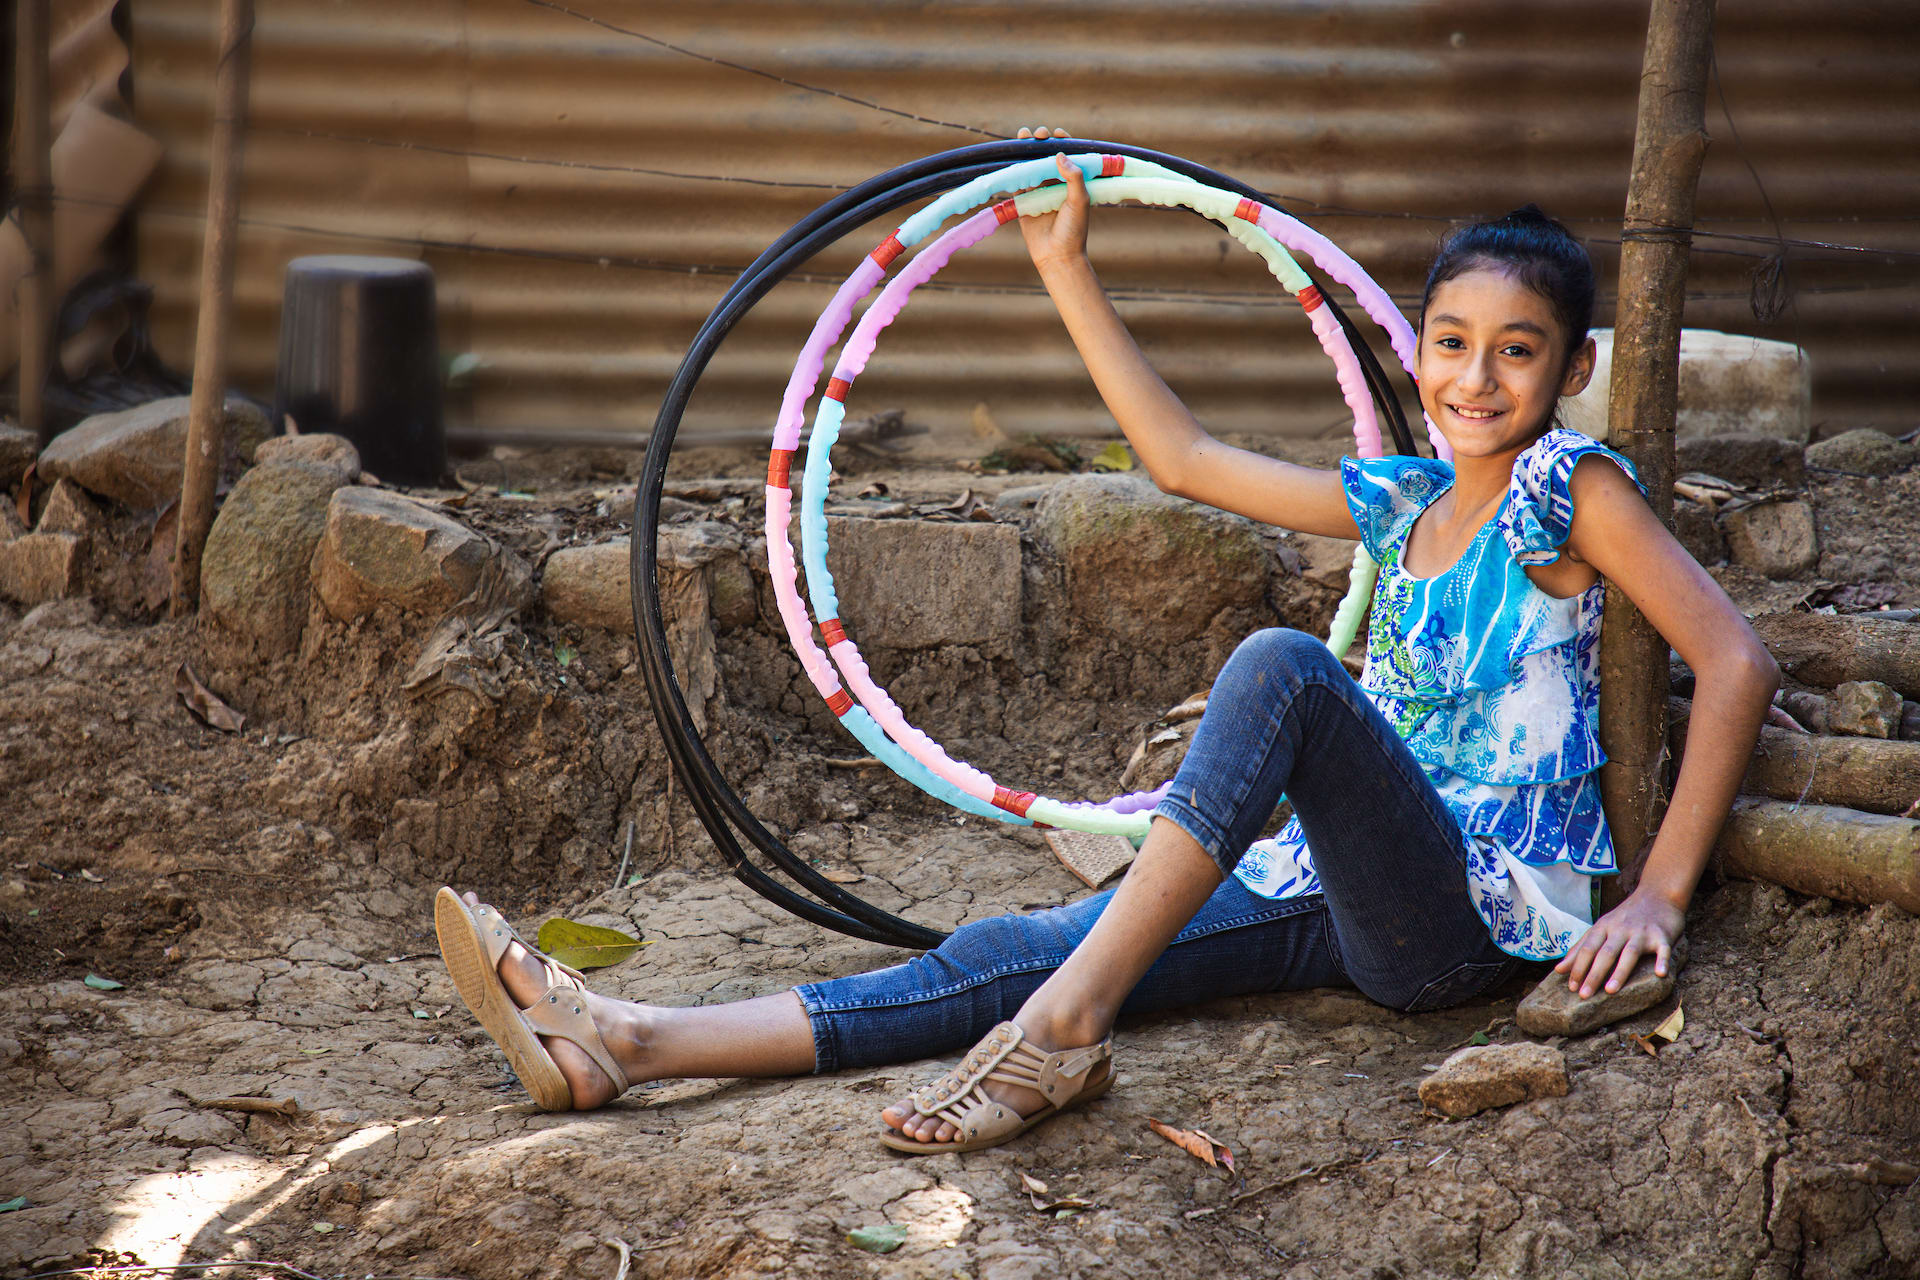 Suleyma is wearing jeans with a colorfully patterned shirt. She is sitting in front of her home and is holding several hula hoops.